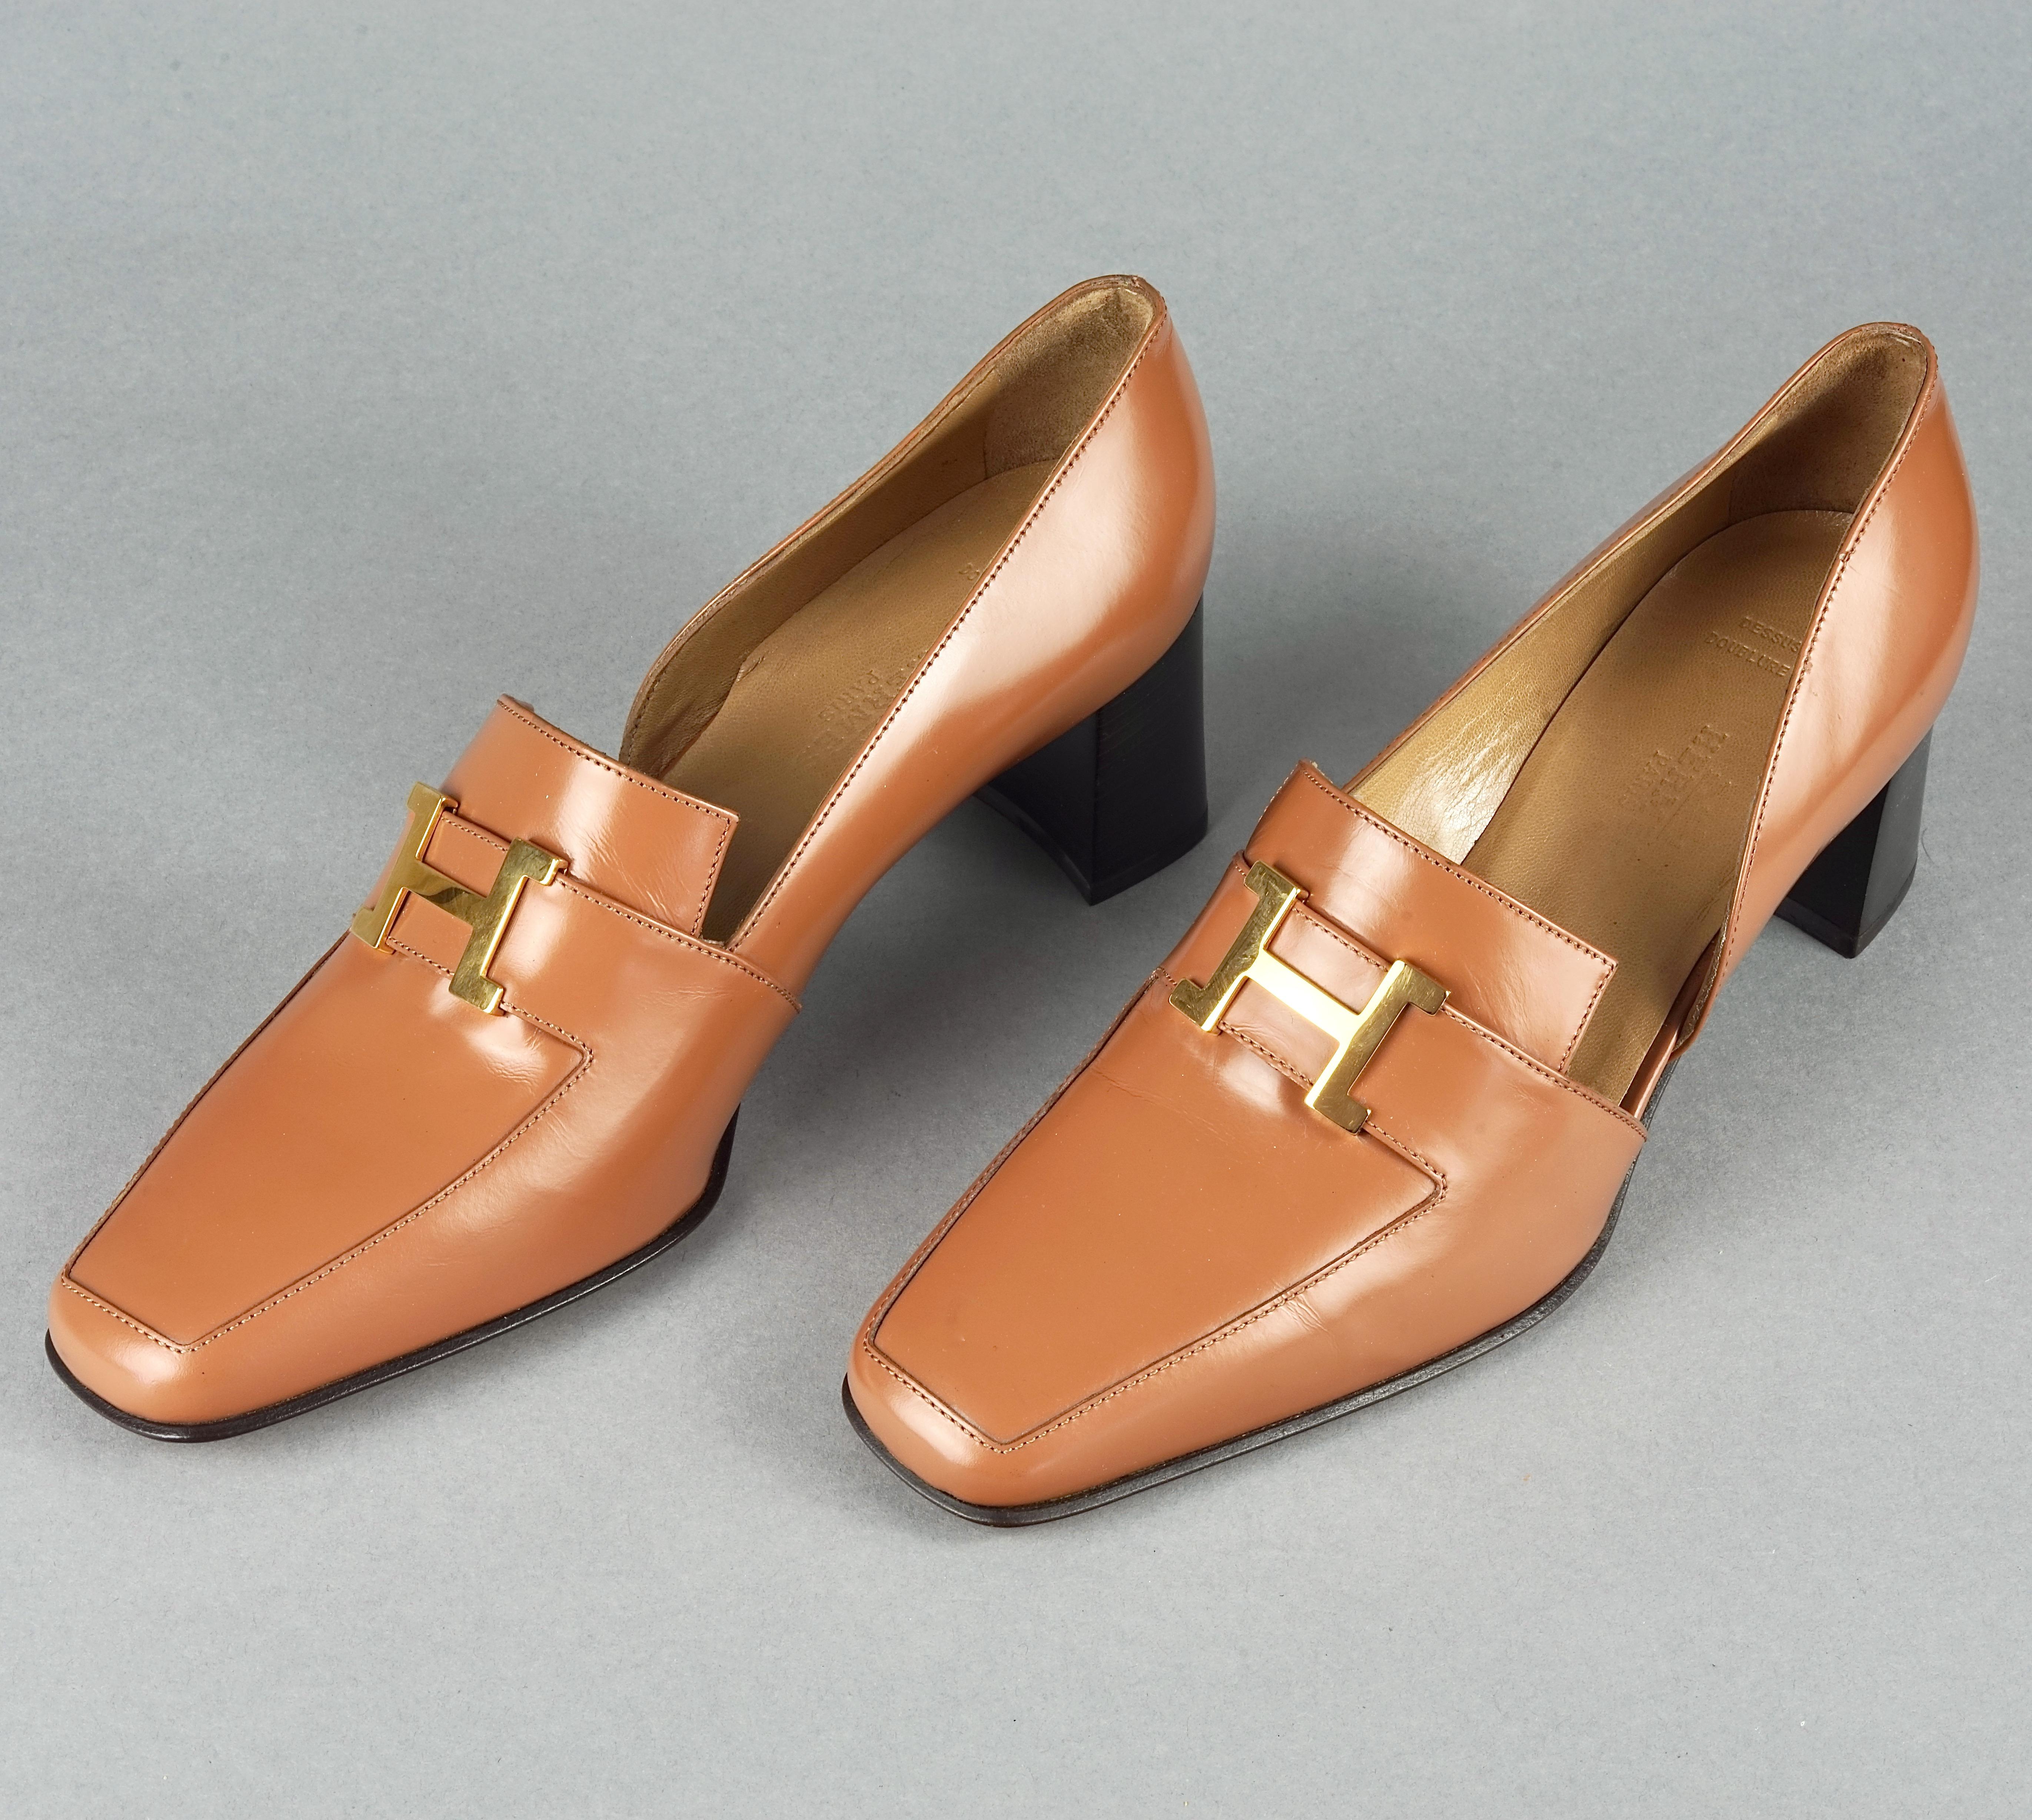 Vintage HERMES H Logo Leather Heel Loafer Shoes

Size: 37.5 EU

Features:
- 100% Authentic HERMES.
- Brown supple leather pumps/ heel loafers with gold metal H logo.
- Label reads: HERMES Made in Italy with S mark (Solde/ Sale).
- Size 37.5.
- Comes